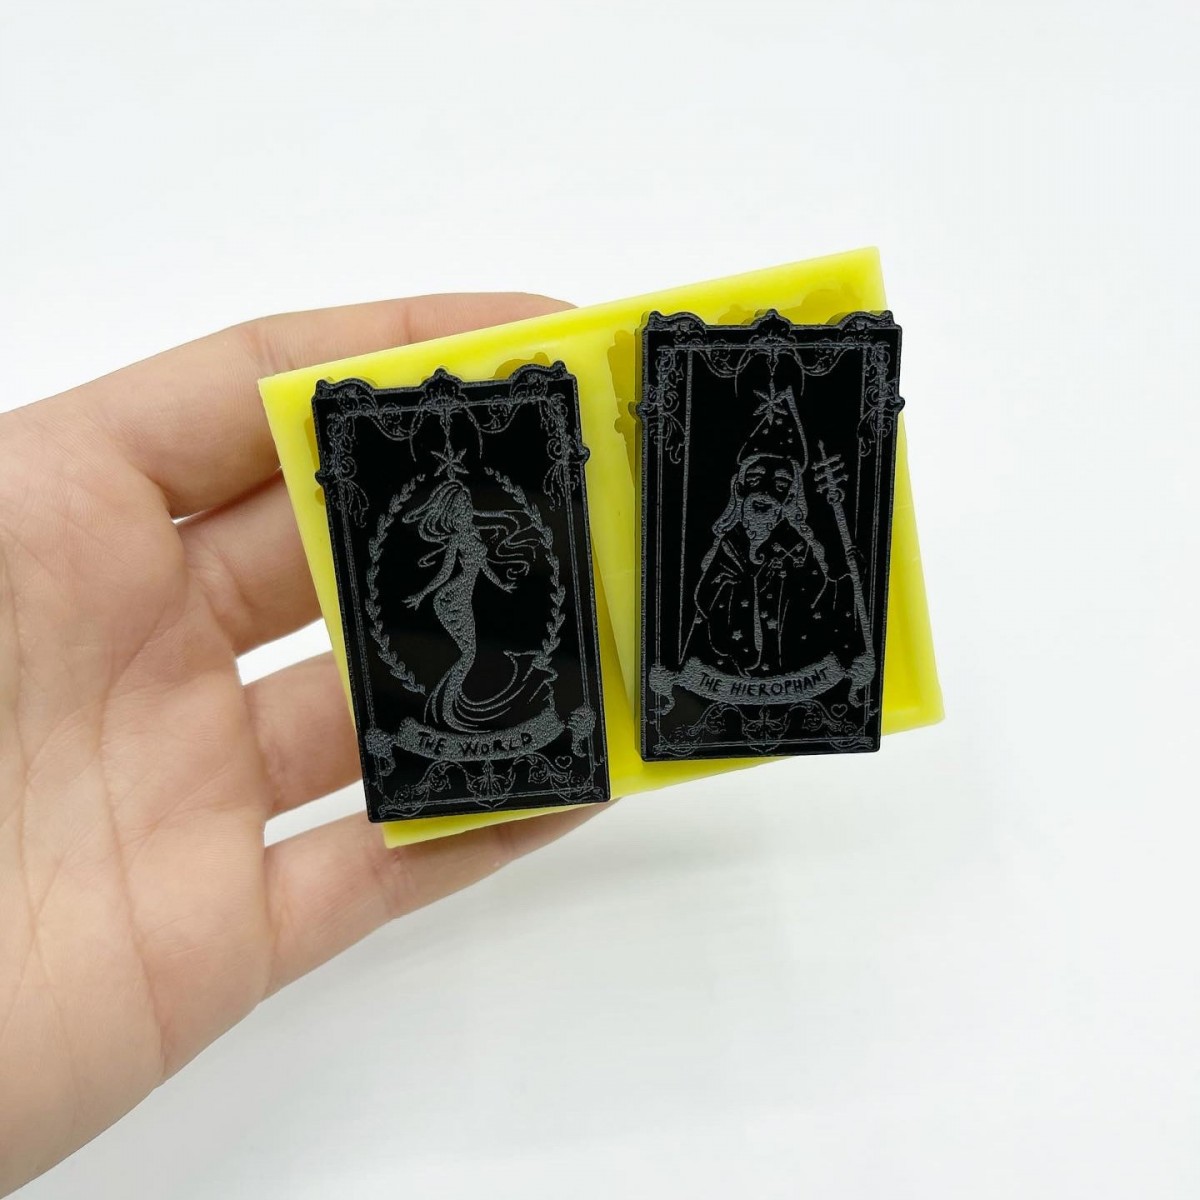 Set of "The World" and "The Hierophant" Tarot Cards Mold